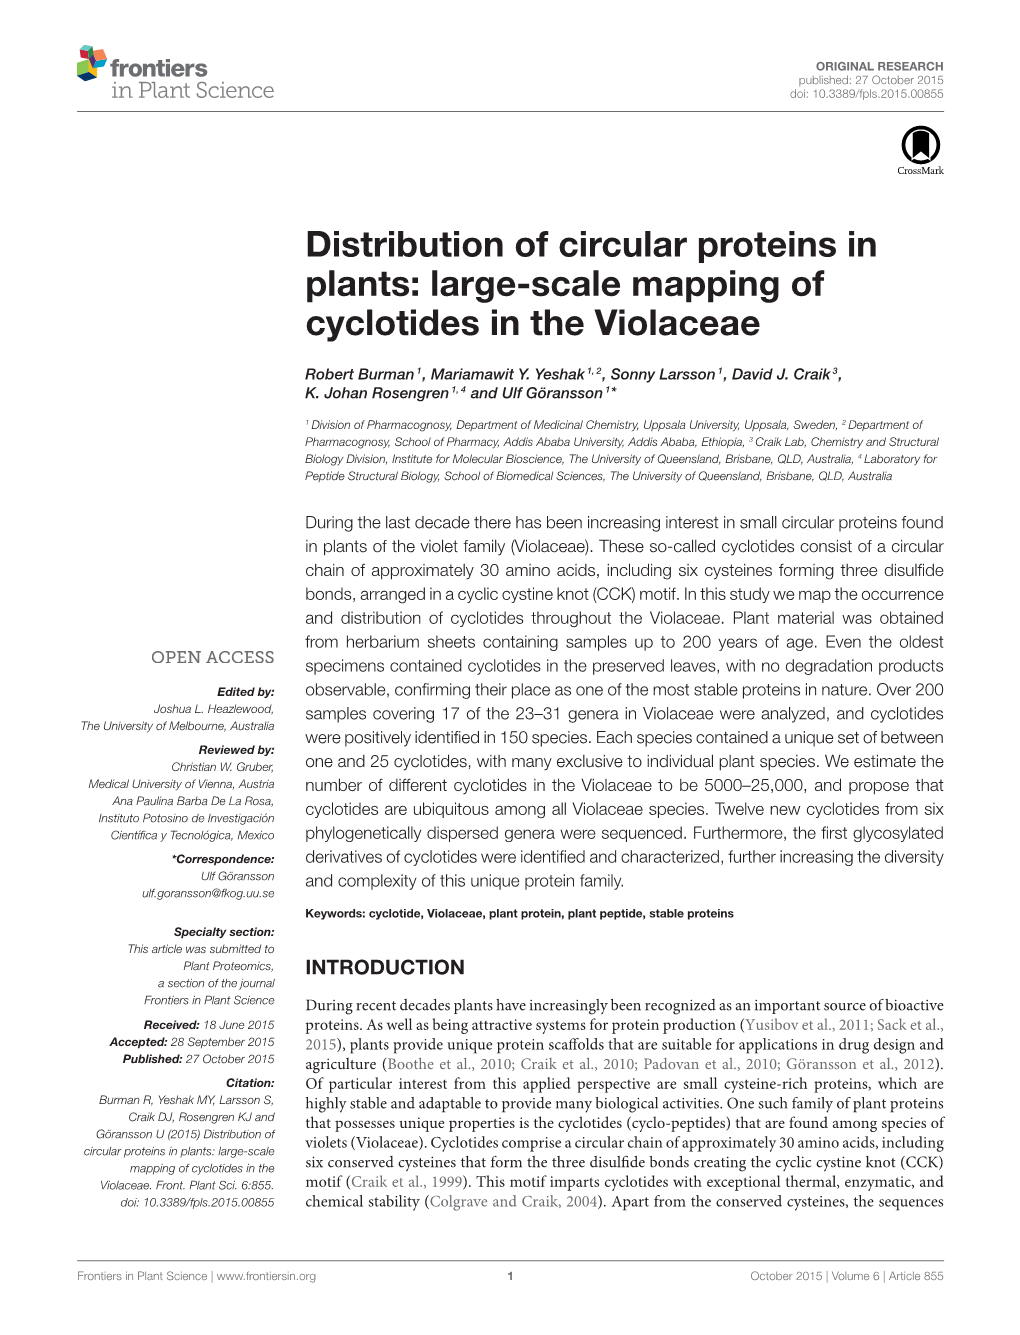 Large-Scale Mapping of Cyclotides in the Violaceae